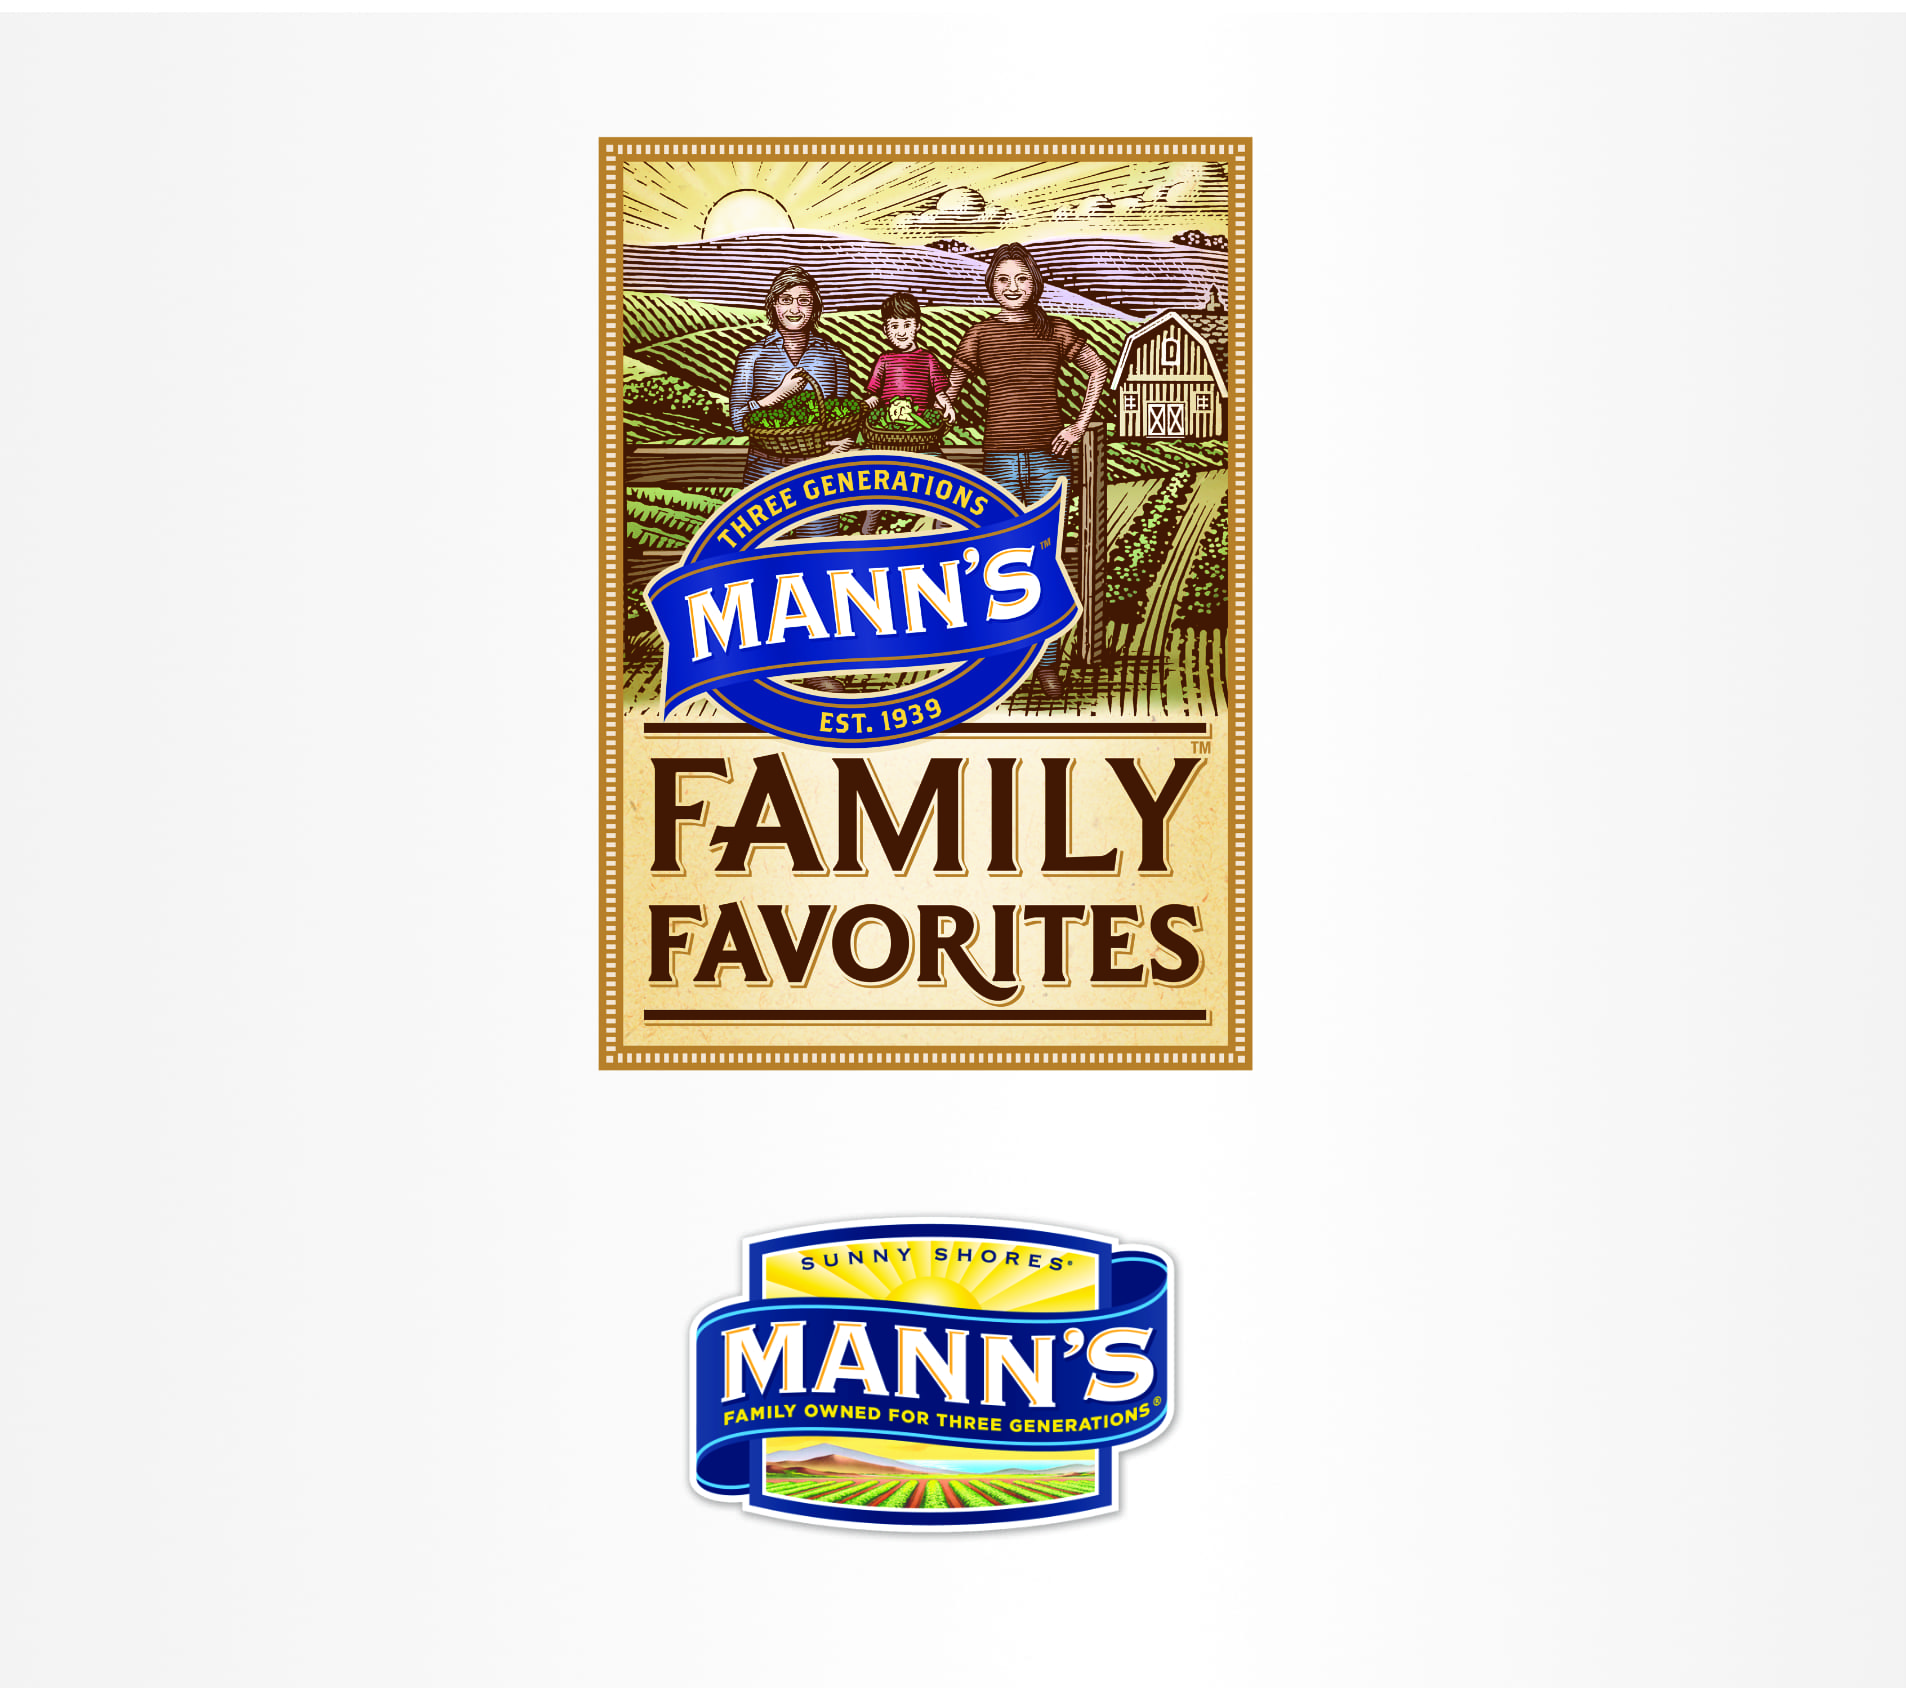 Mann Packing Company